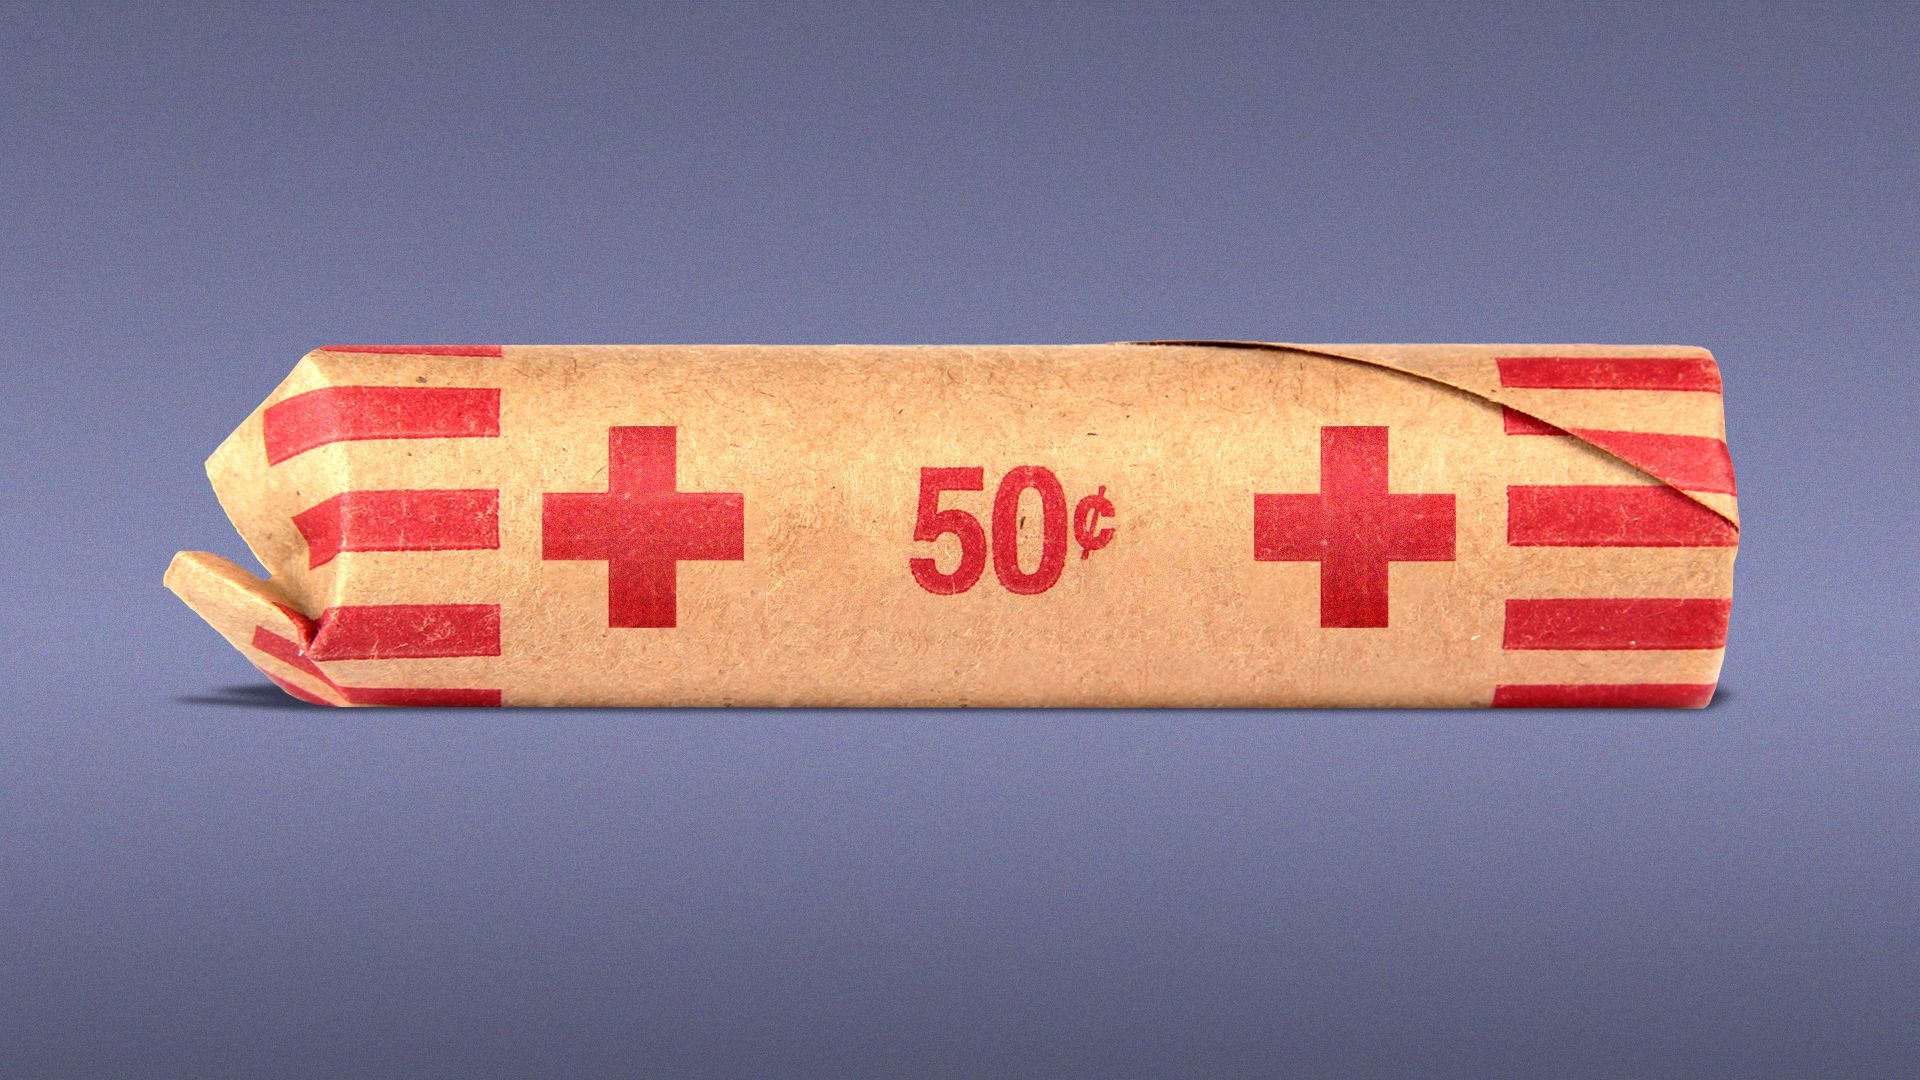 Illustration of a penny roll with red medical cross symbols printed on the side